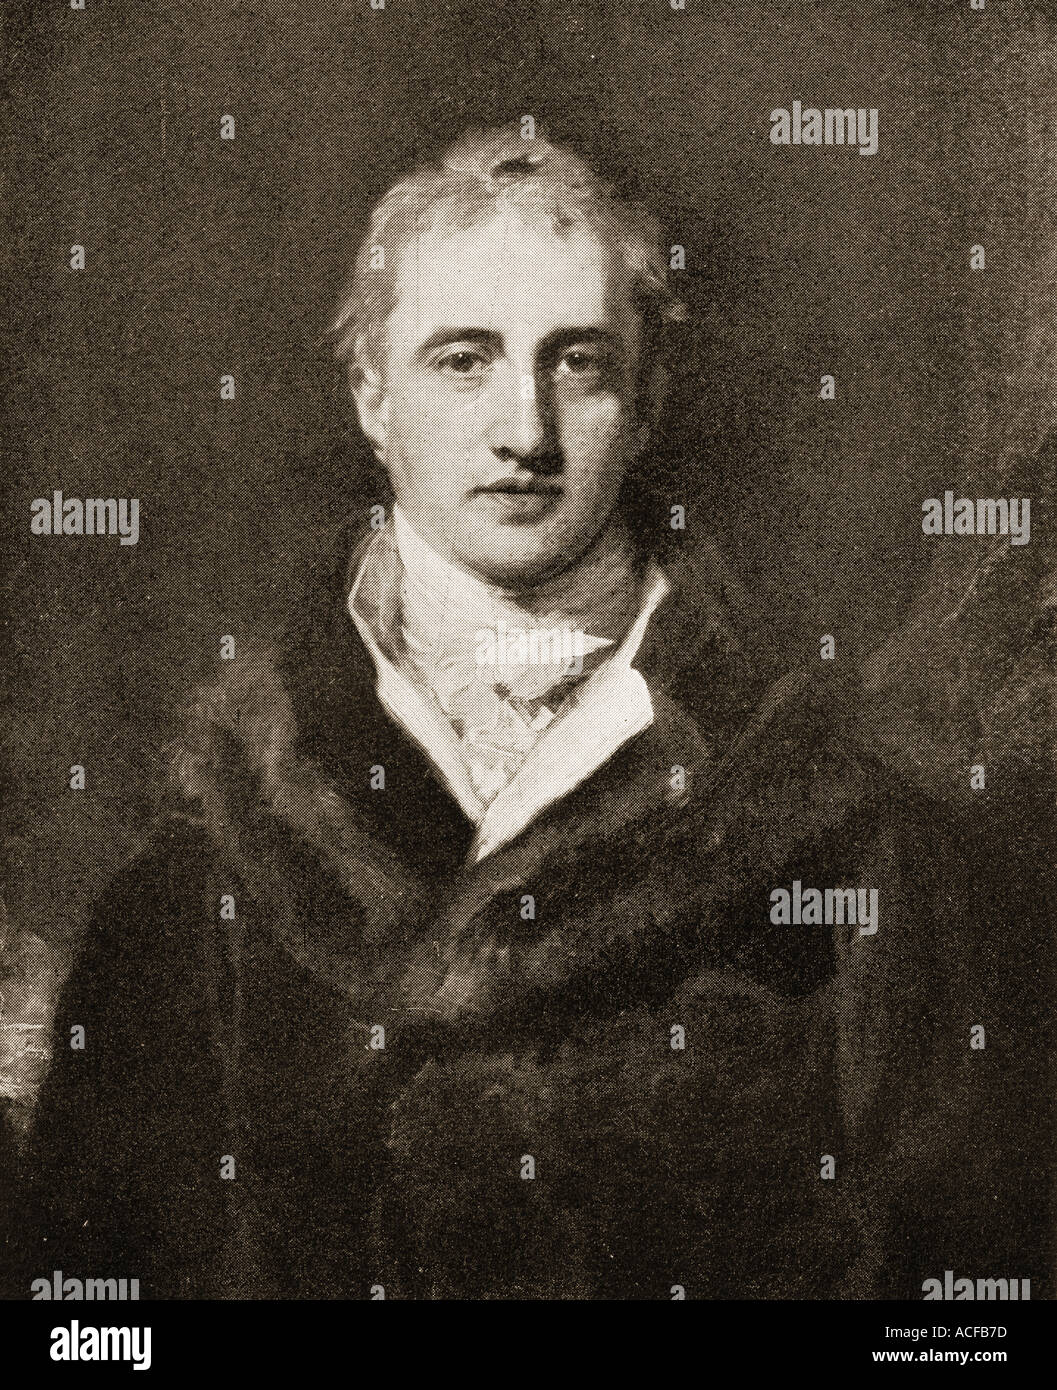 Robert Stewart, 2nd Marquess of Londonderry, Viscount Castlereagh, 1769 - 1822. Irish/British statesman and Secretary of State for Foreign Affairs. Stock Photo